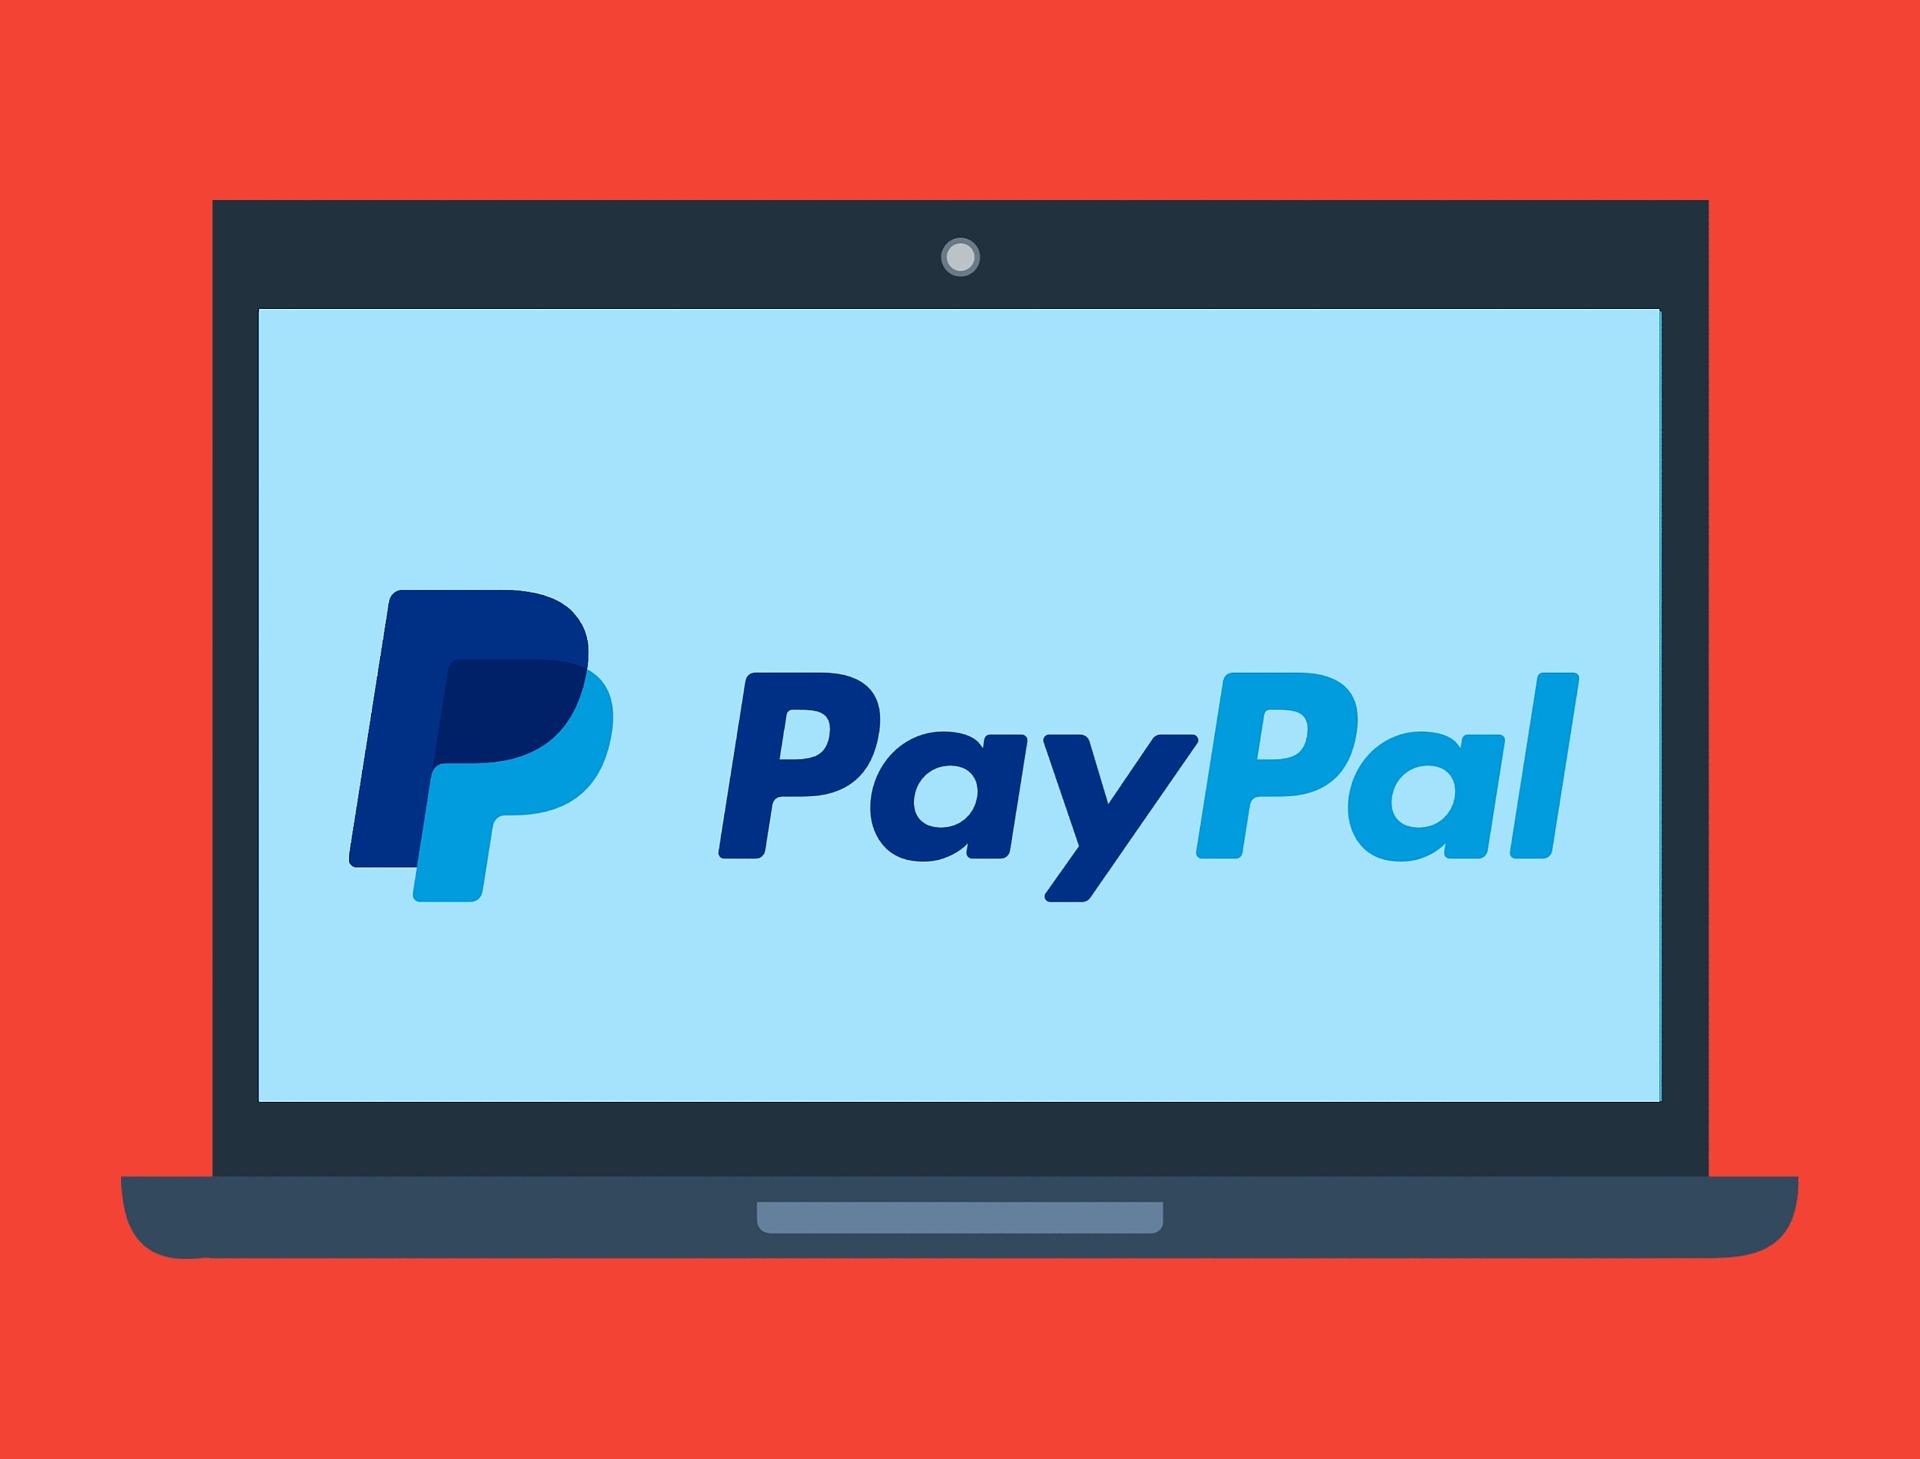 Once again we accept Paypal for payment